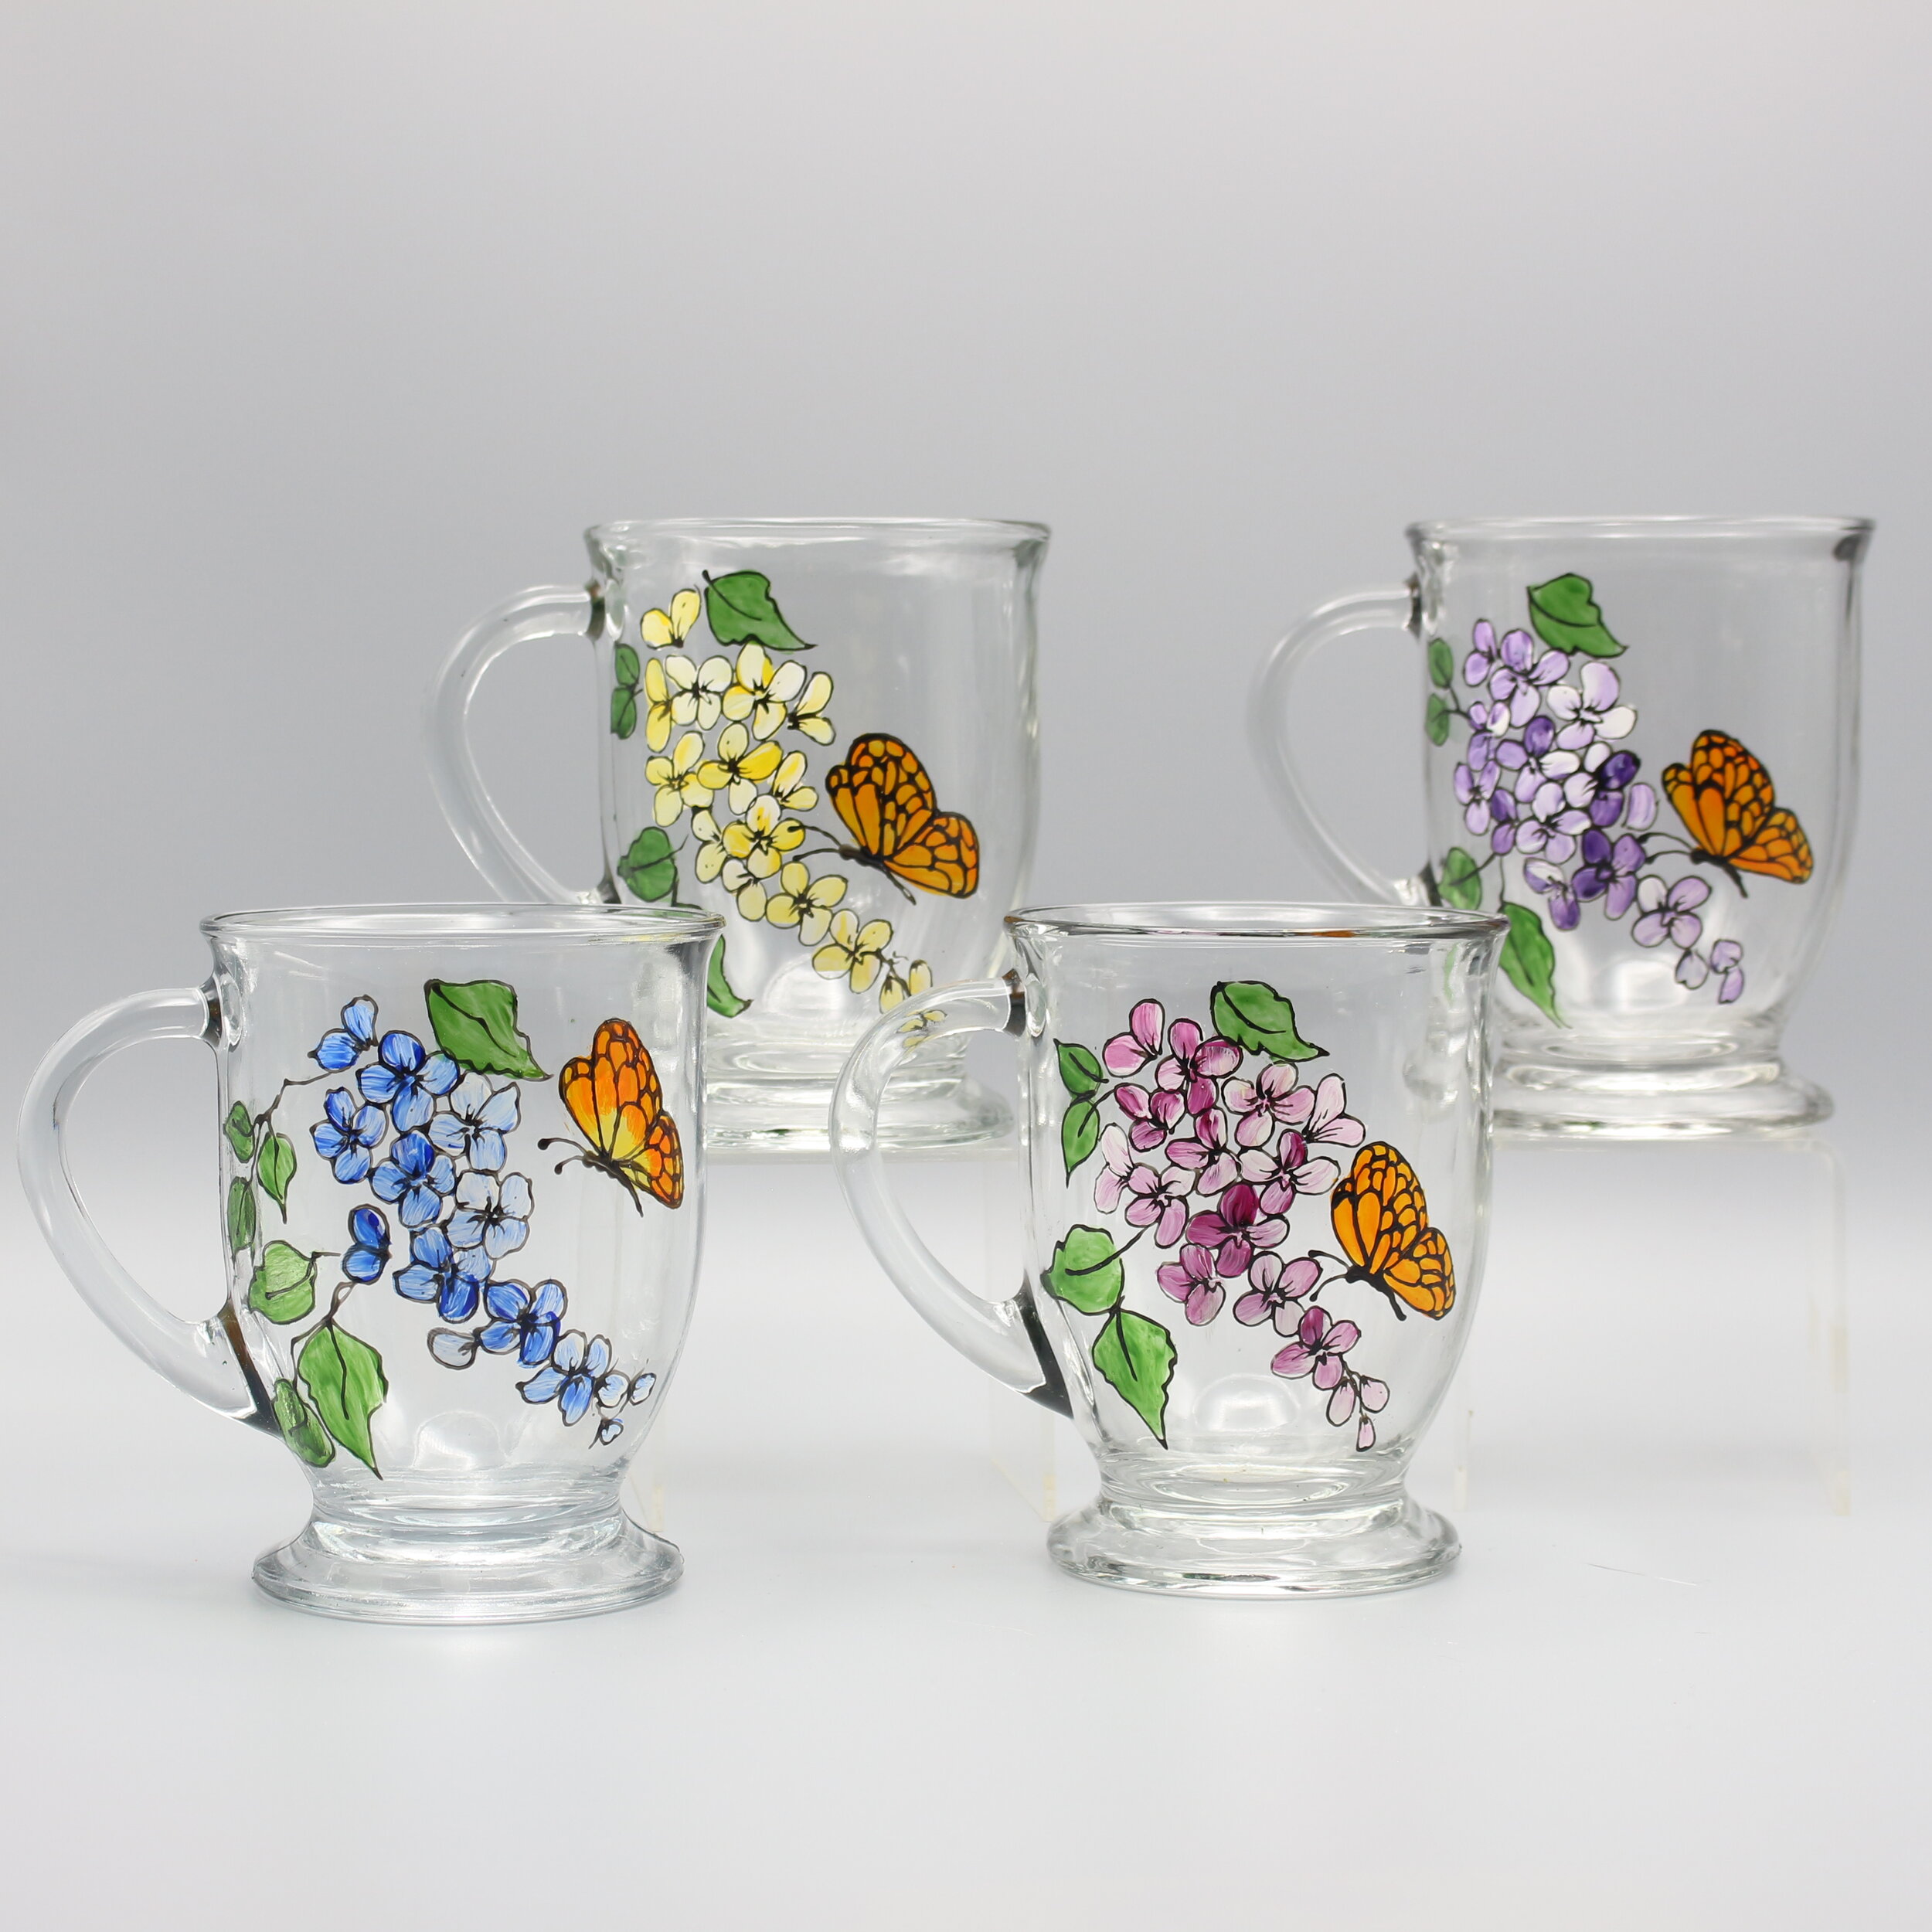 http://images.squarespace-cdn.com/content/v1/5570dc78e4b0bbe8e5cab3d0/1581986635819-S7AIYGQP3JPAW0M648BX/butterfly_and_flower_coffee_mugs.JPG